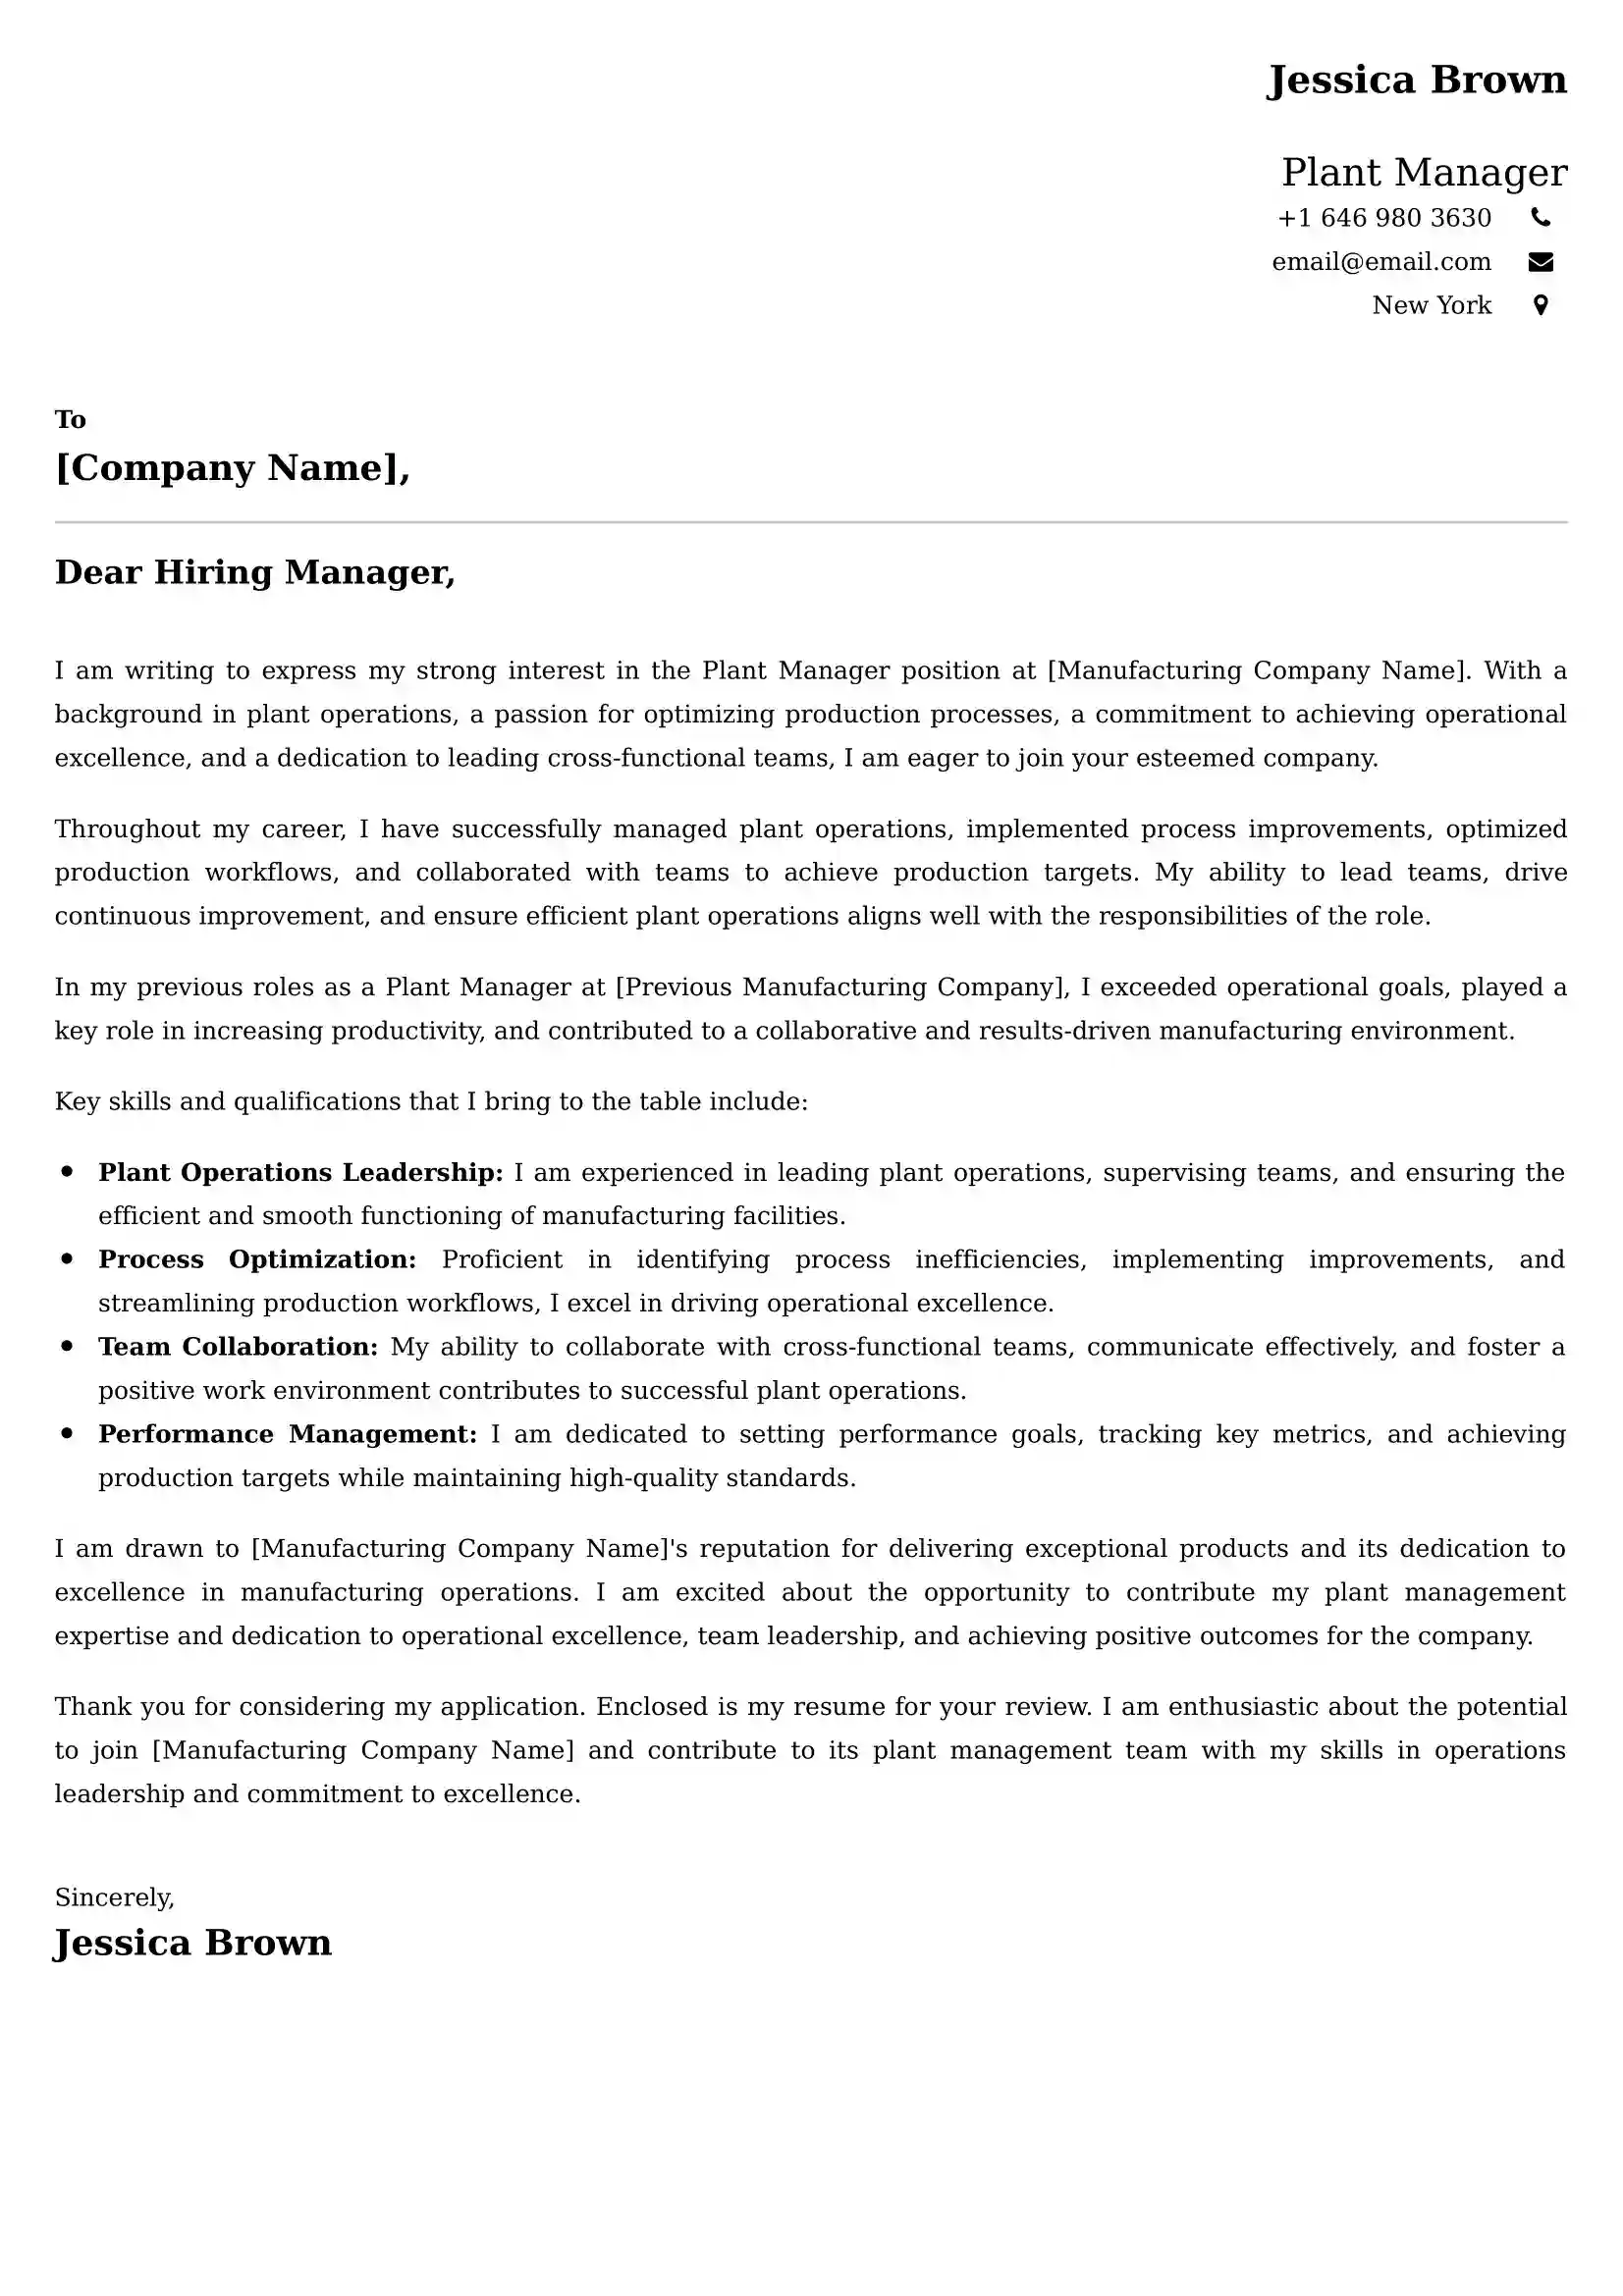 Plant Manager Cover Letter Examples - Latest UK Format